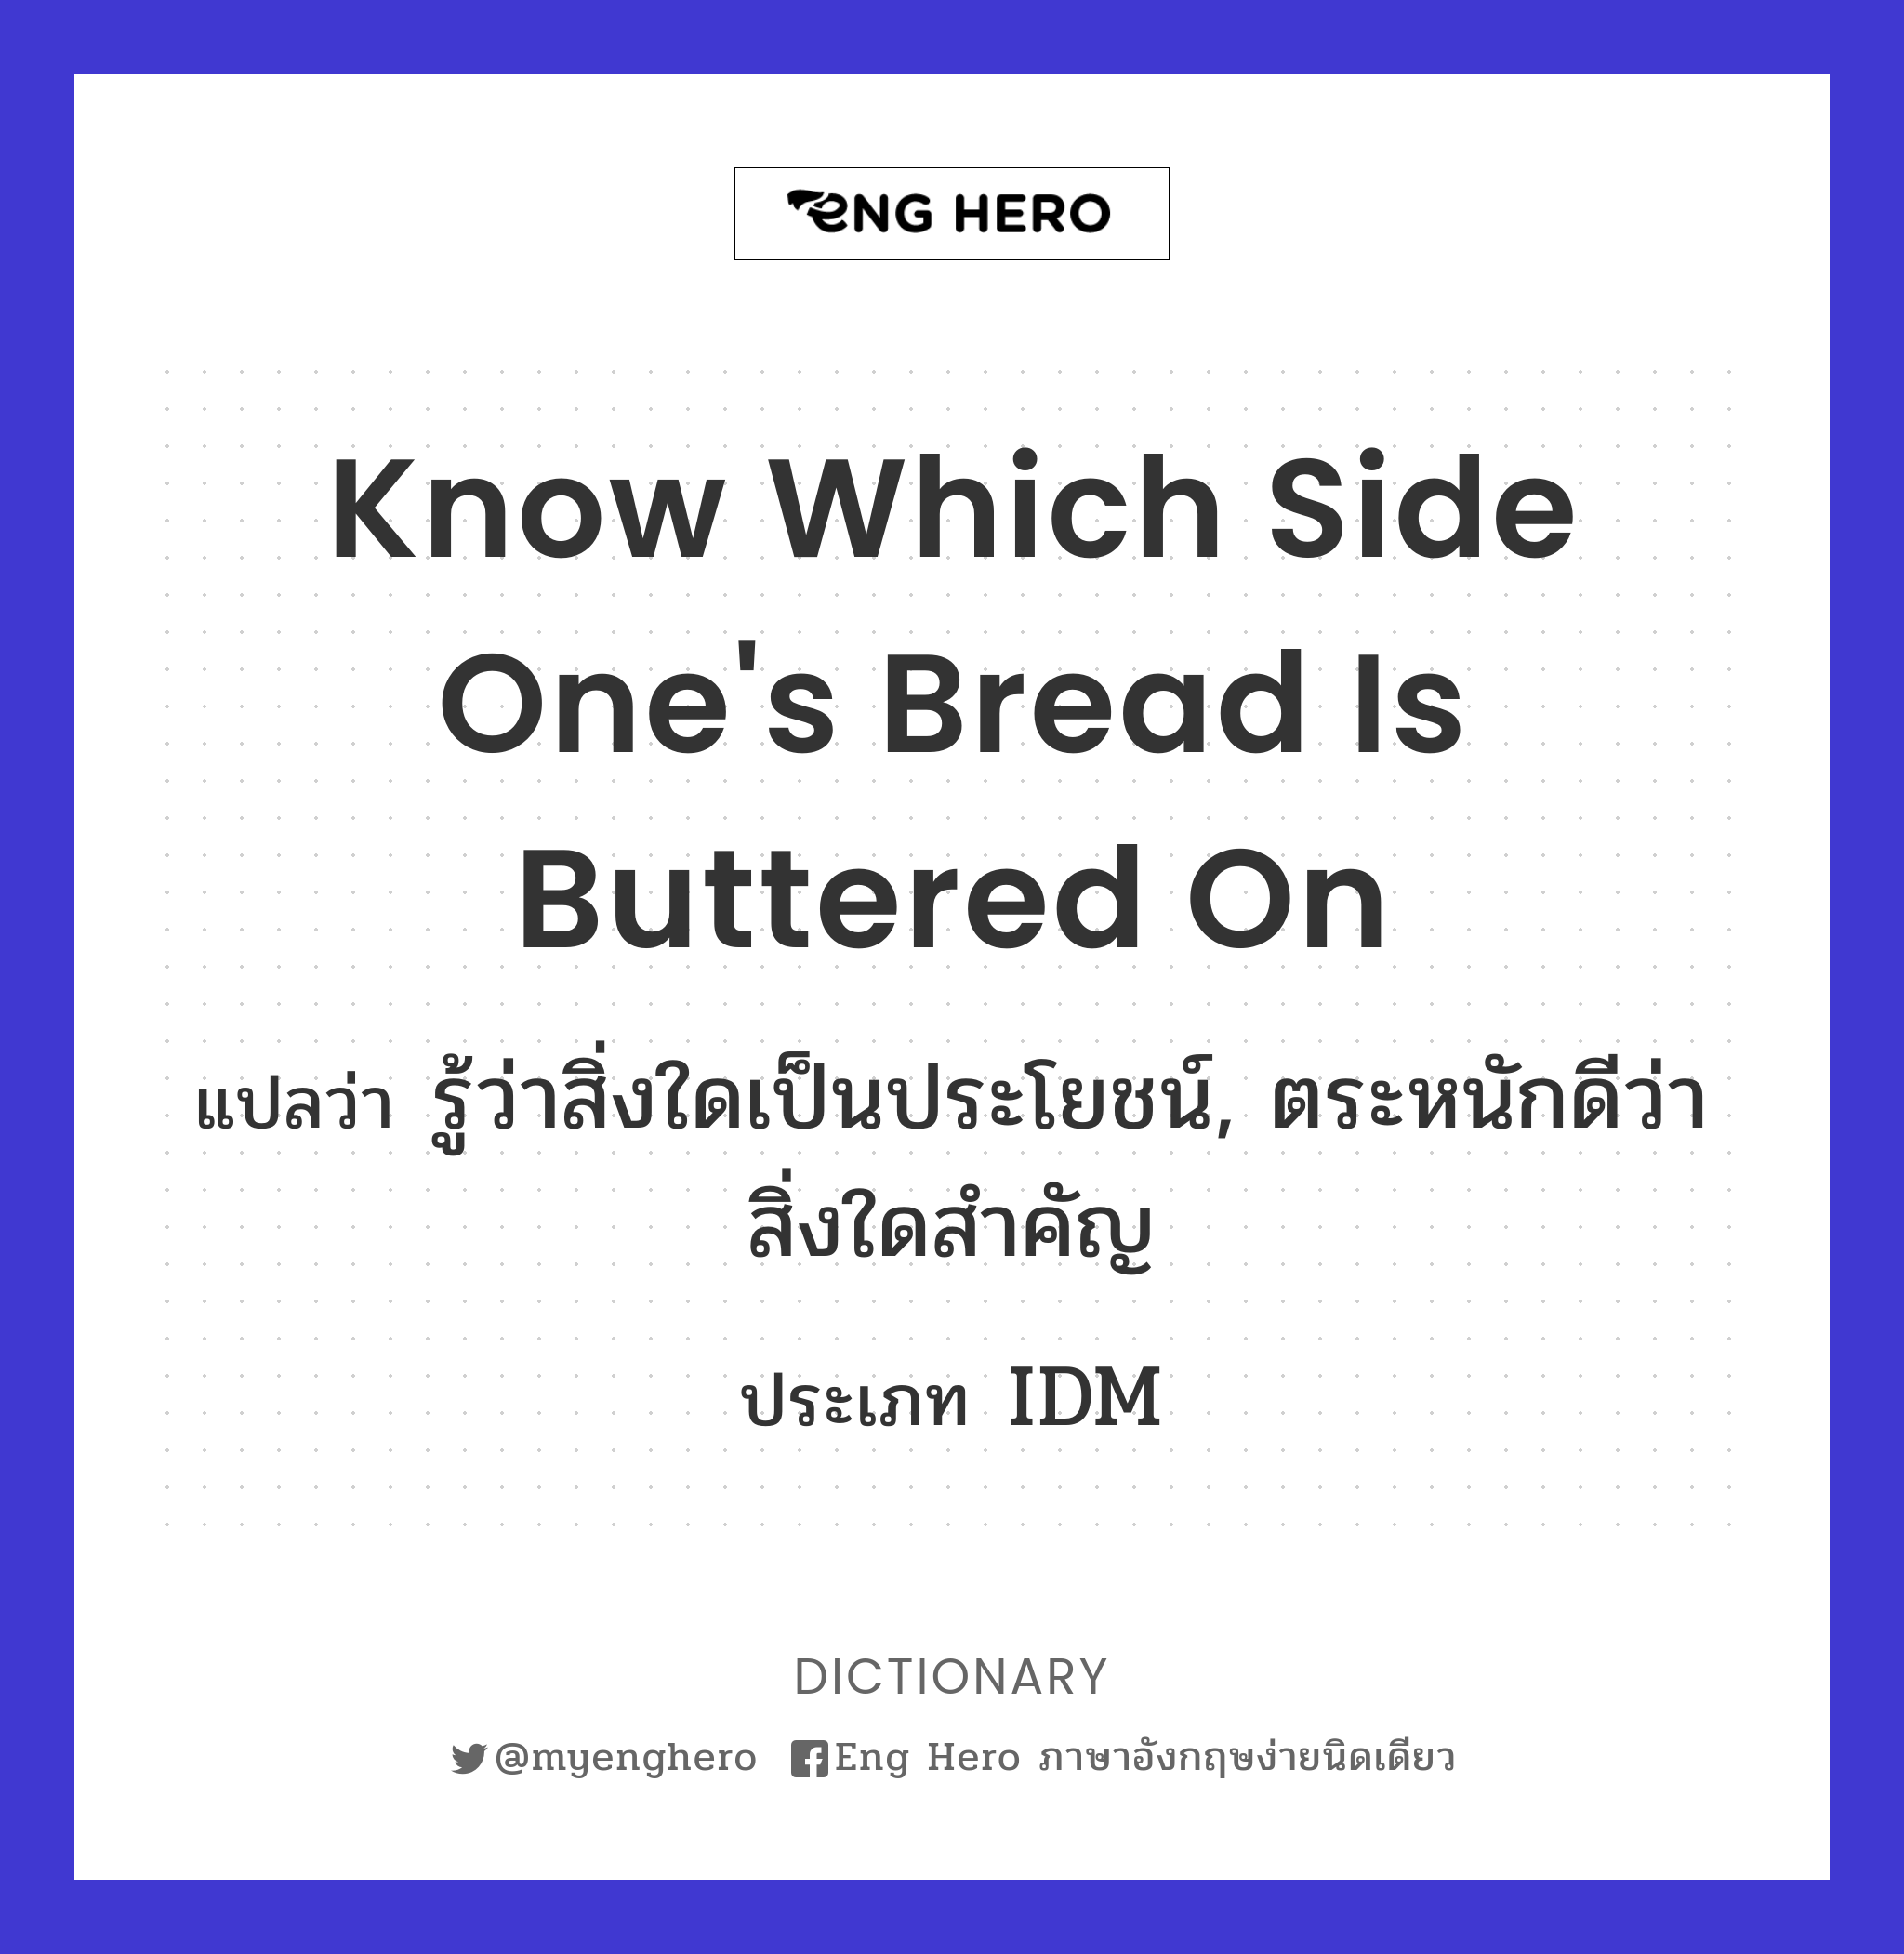 know which side one's bread is buttered on